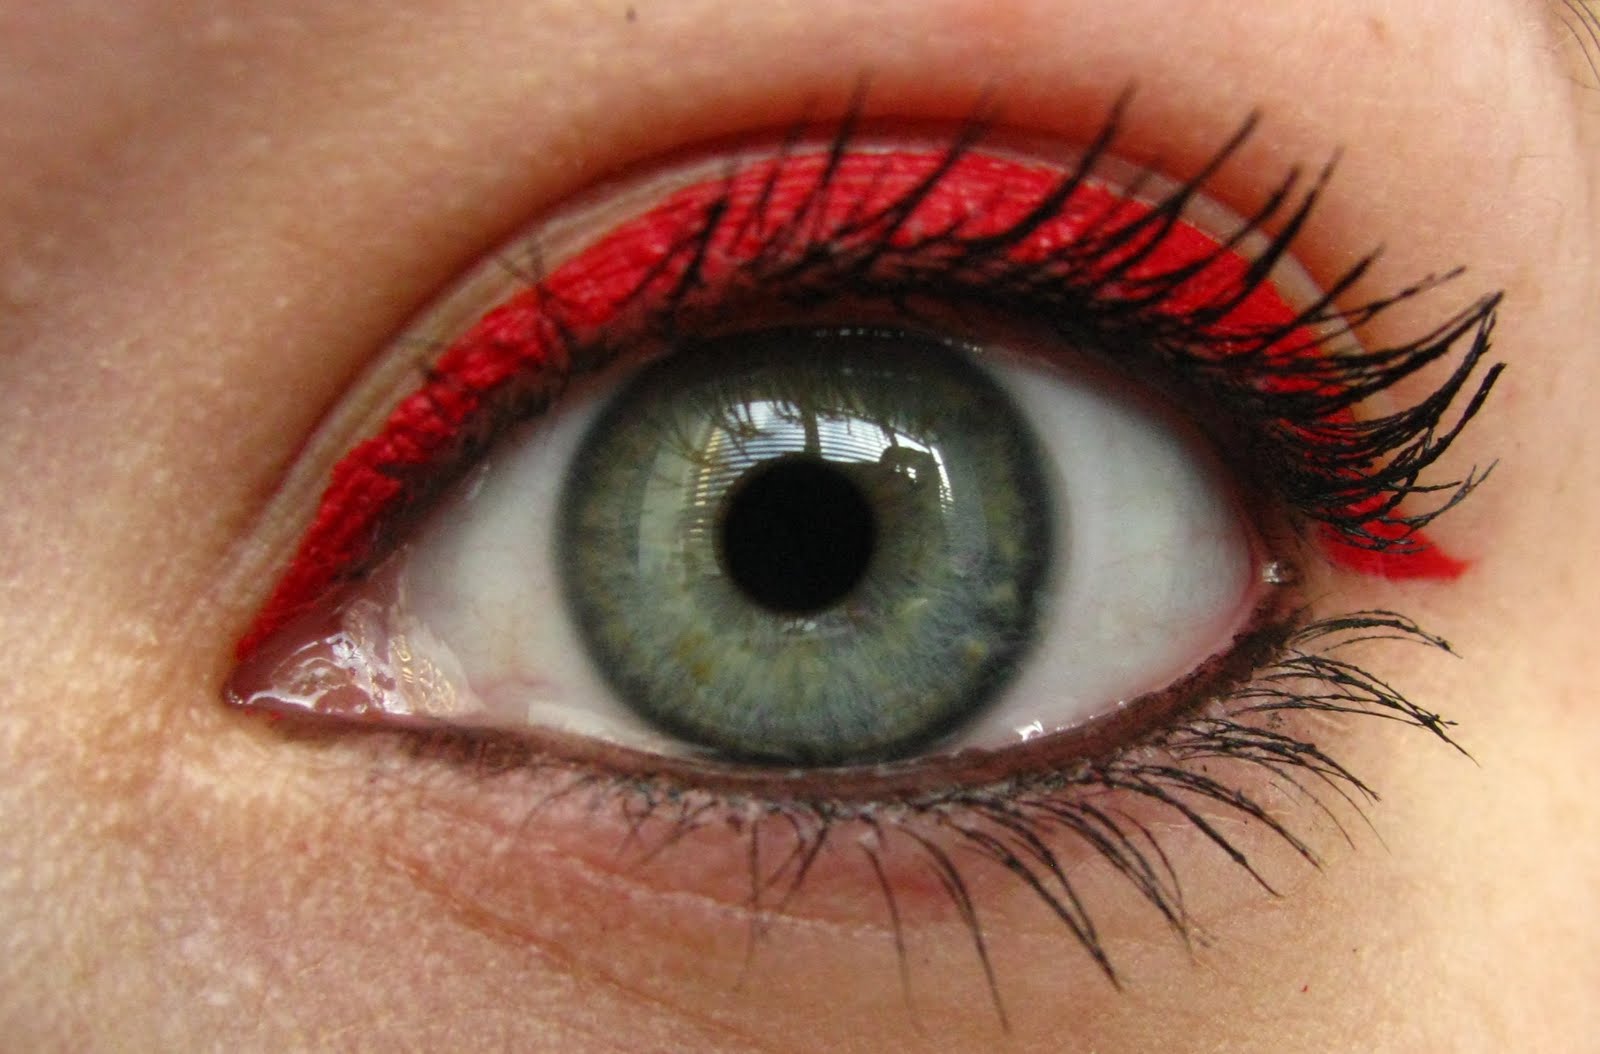 London Beauty Review: Red eyeliner - wearable